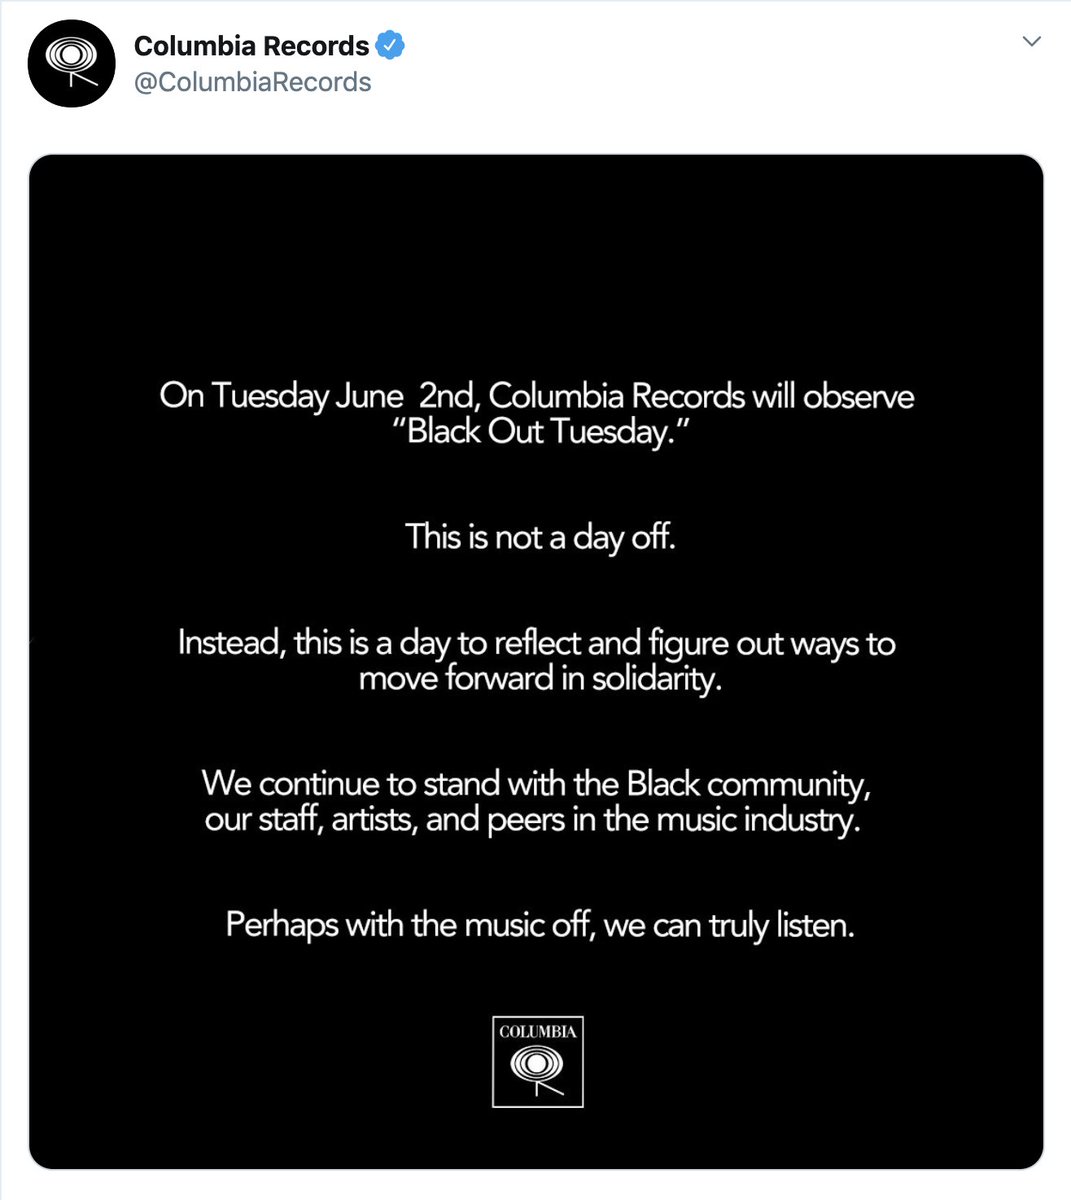 The music industry is staging a blackout on 6/2 over the killings of #GeorgeFloyd and 'other Black citizens at the hands of police.' Launched by 2 Black women, #TheShowMustBePaused will see major labels pause work to reflect: 'Perhaps with the music off, we can truly listen.'